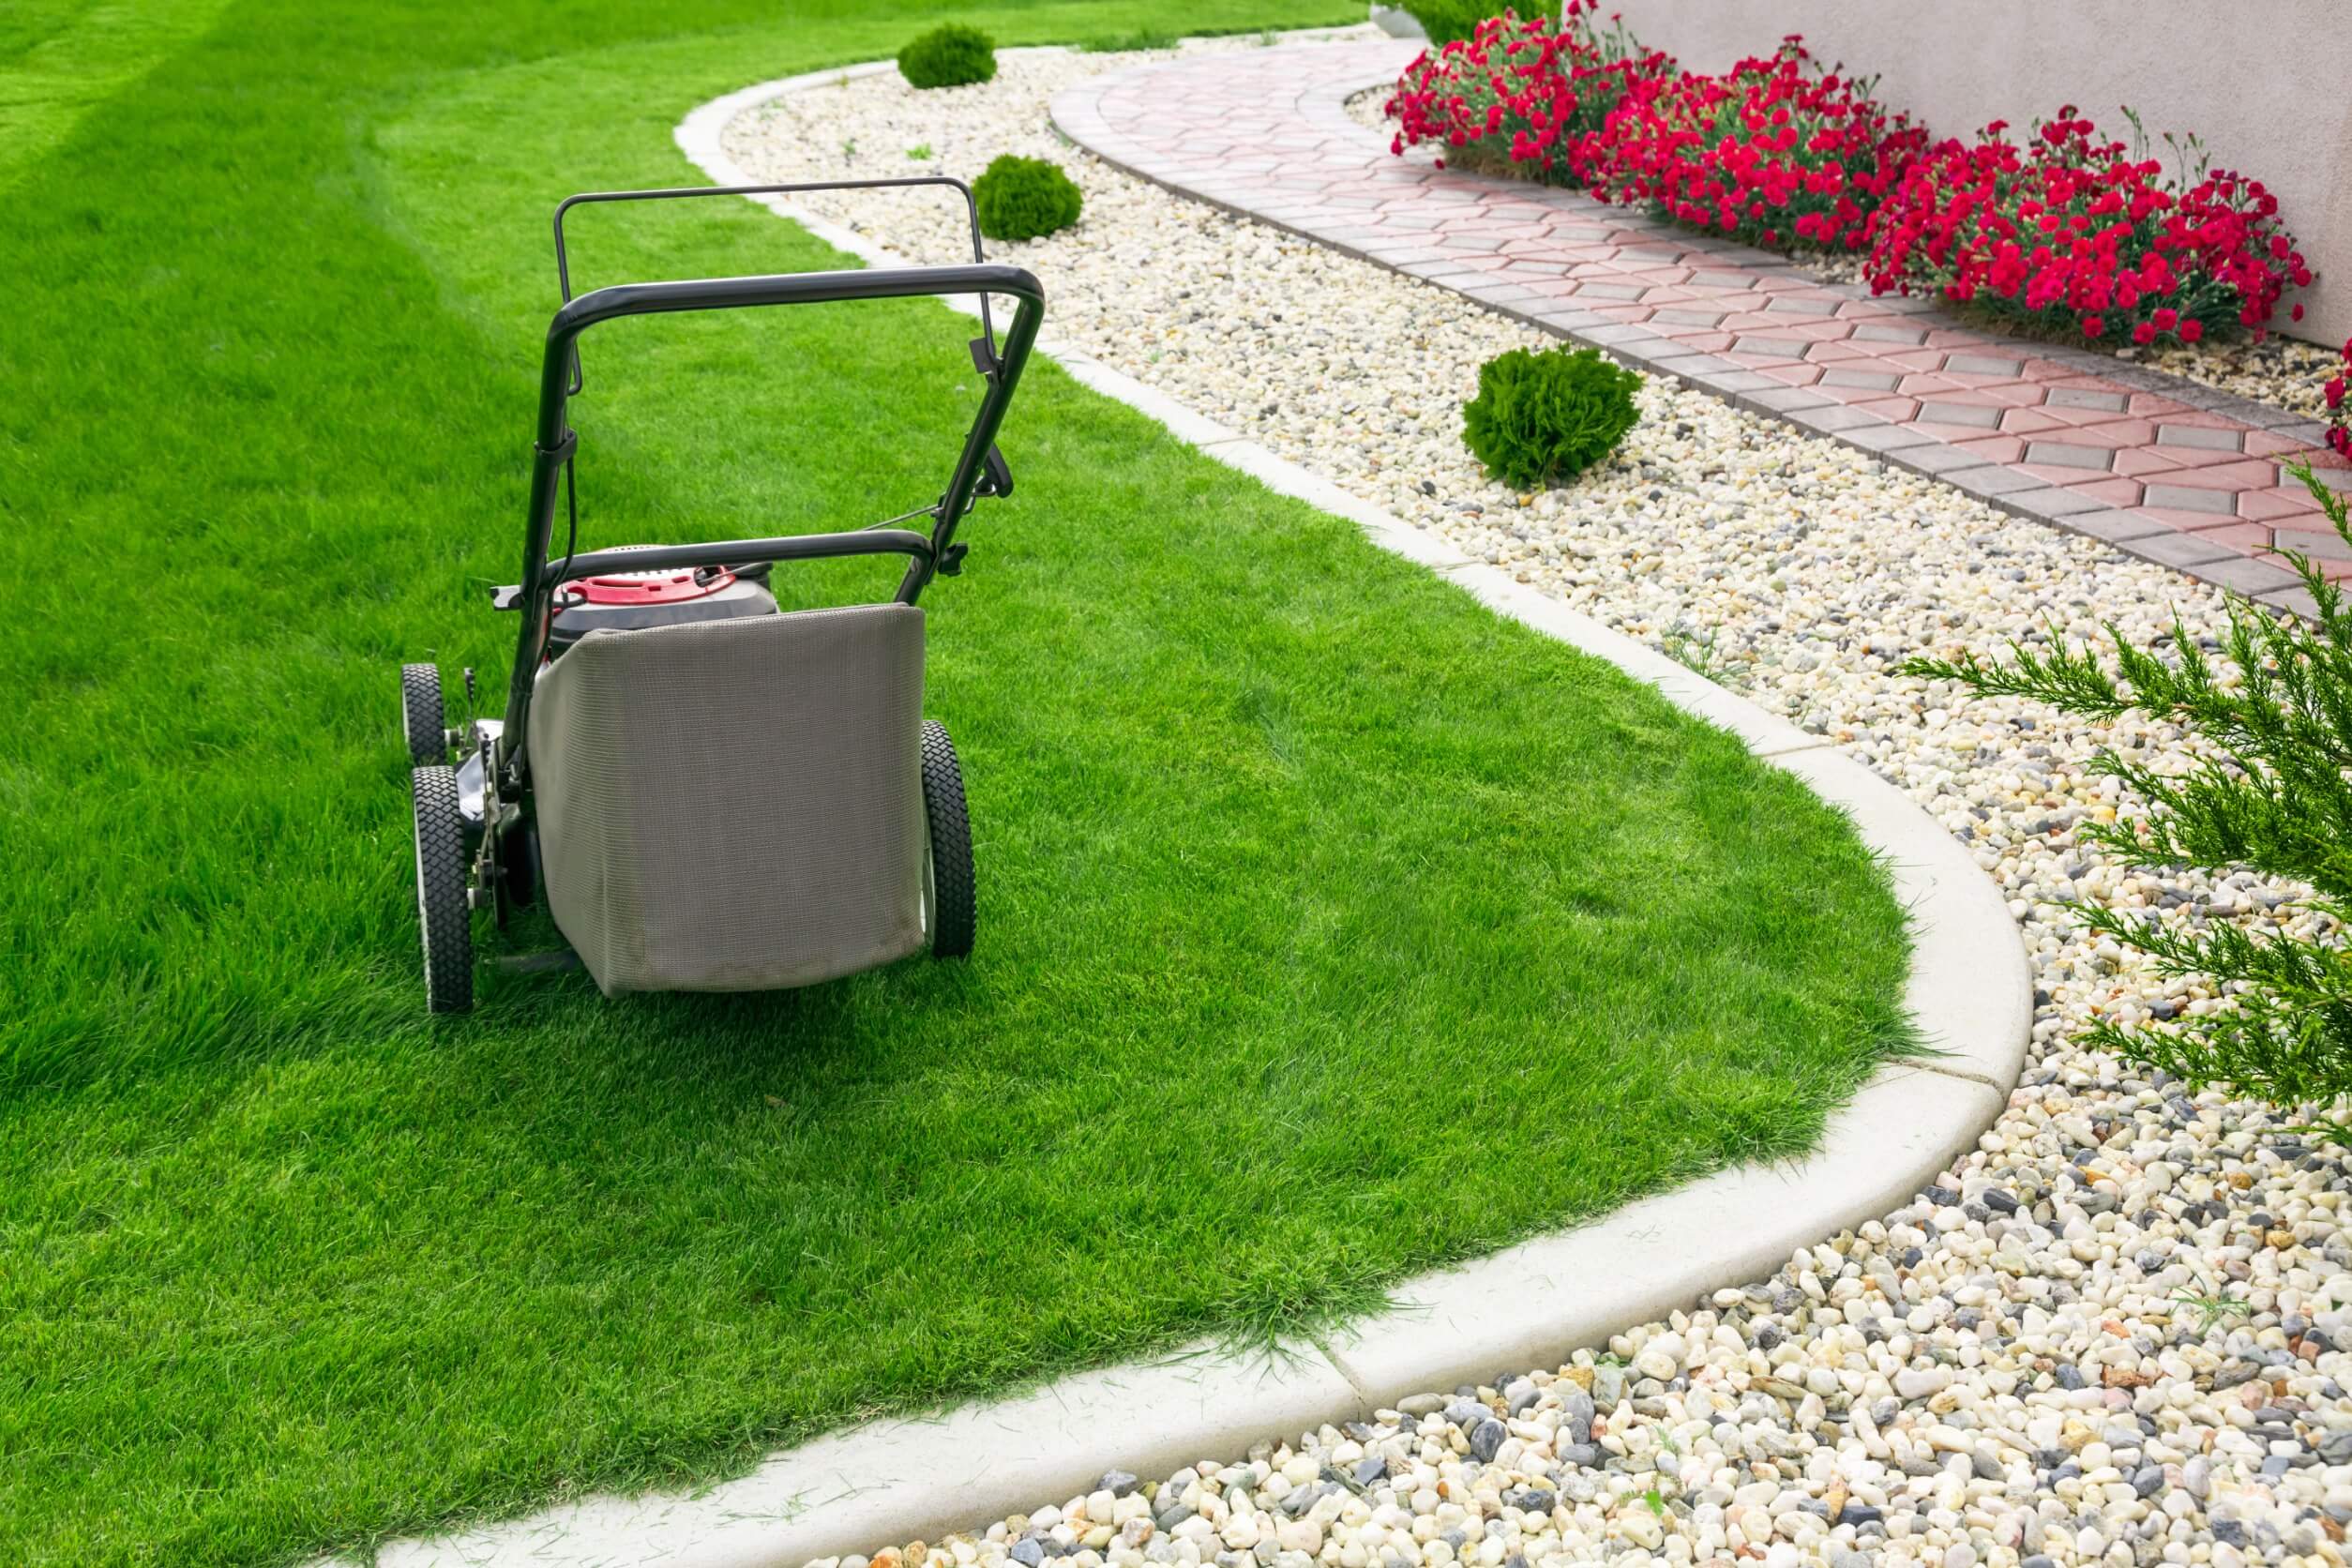 Lawn Mowing Business For Sale in Hobart